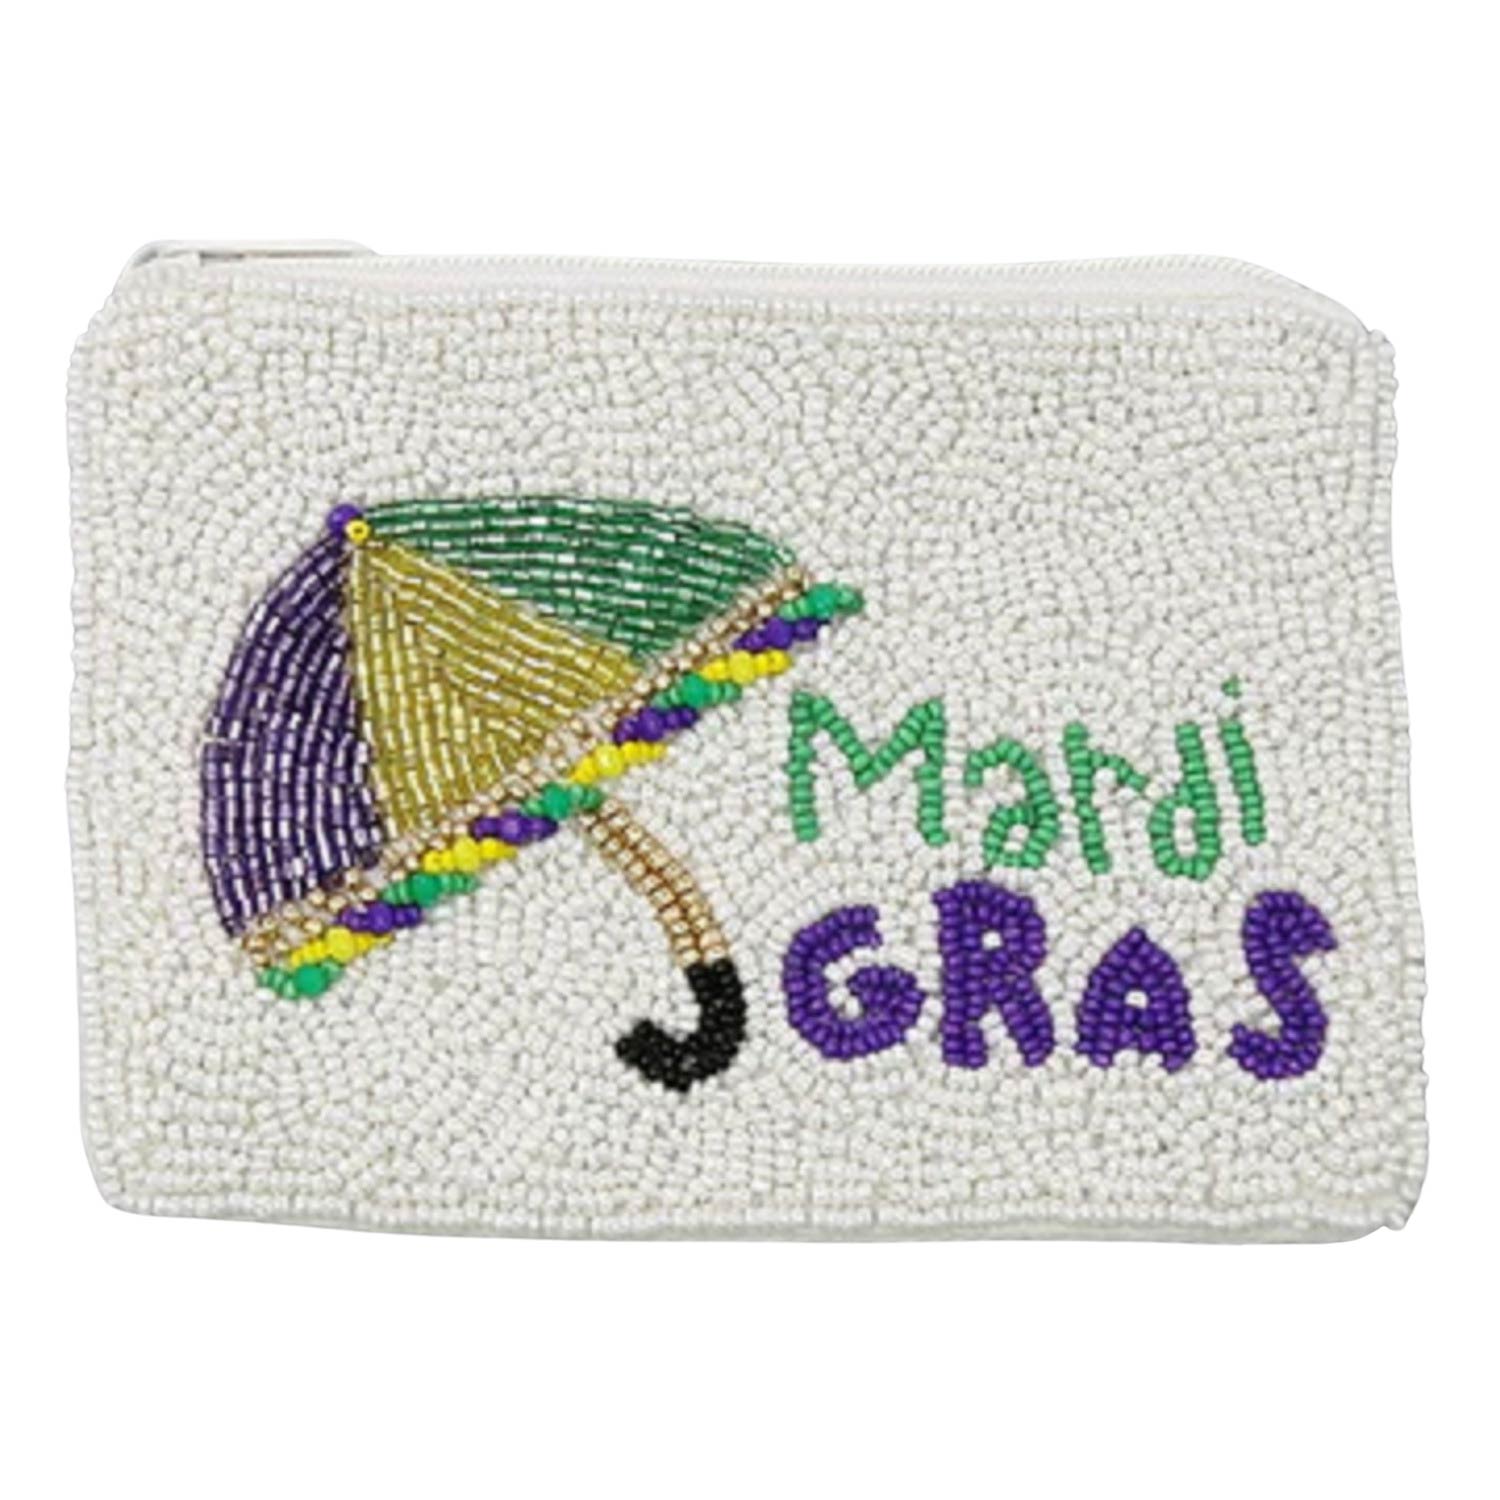 Multi Mardi Gras Umbrella Seed Beaded Coin Purse, Be the ultimate fashionista carrying this trendy mardi gras seed beaded purse bag! Great for when you need something small to carry or drop in your bag. perfect for makeup, money, credit cards, keys or coins, and many more things. This handbag features a top zipper closure for security. 